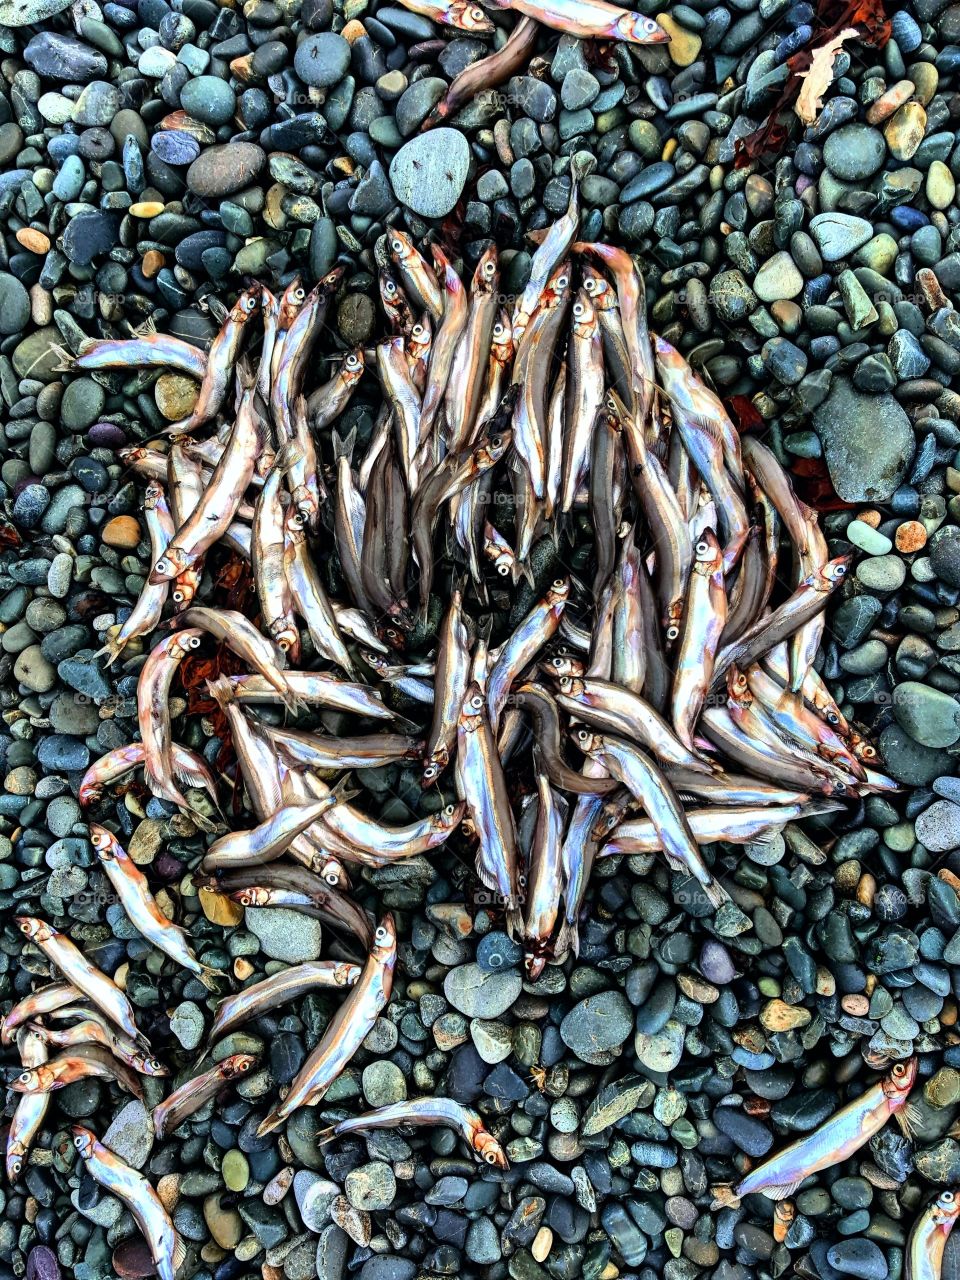 taken in canada, while in my home province of Newfoundland, where people are dependent on the sea, and it's bounty. caplin rolling is an exta special time, you collect them from the beach, to freeze or dehydrate, for the winter.